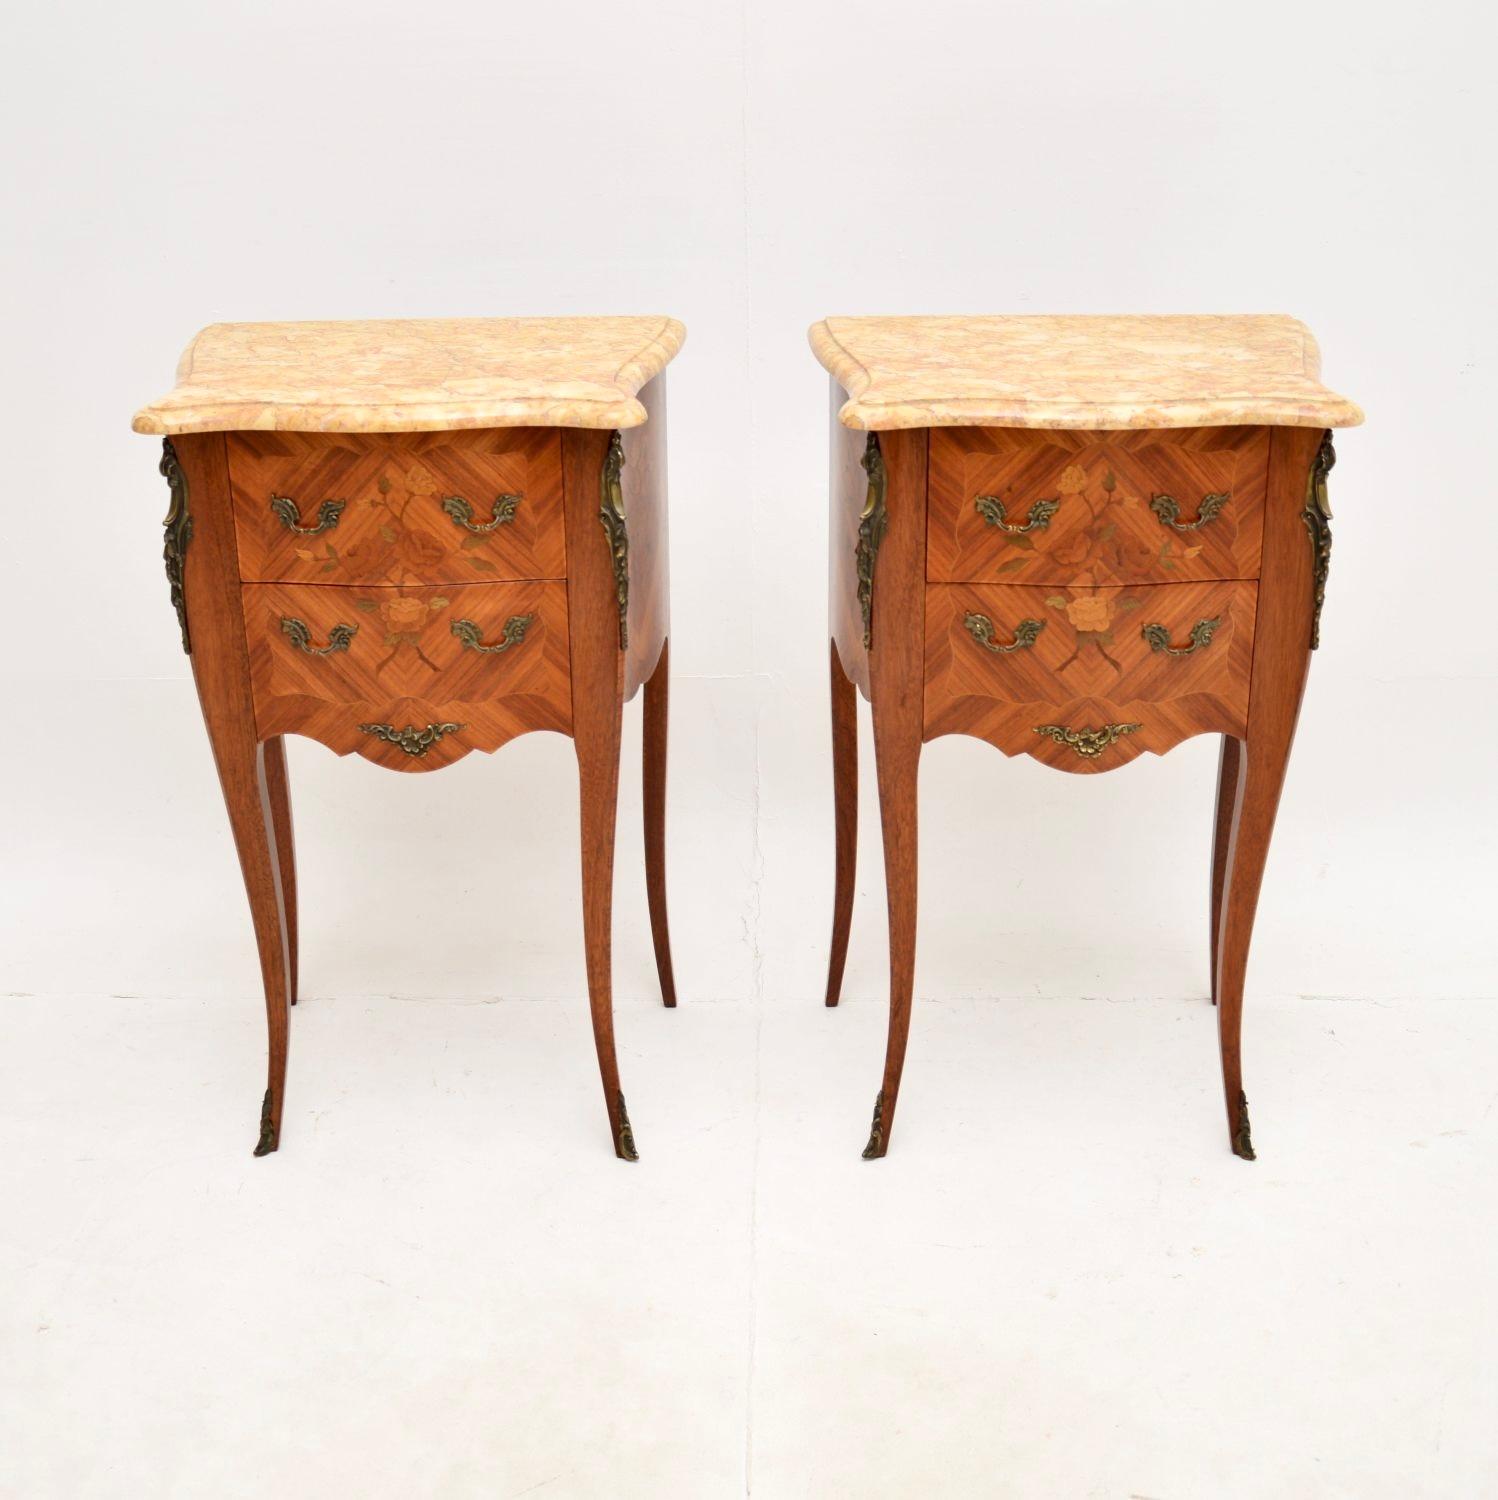 A stunning pair of antique French inlaid marble top bedside chests. They were made in France and date from around the 1900-1920 period.

The quality is fantastic, they have an elegant yet sturdy design. There are high quality ormolu mounts and